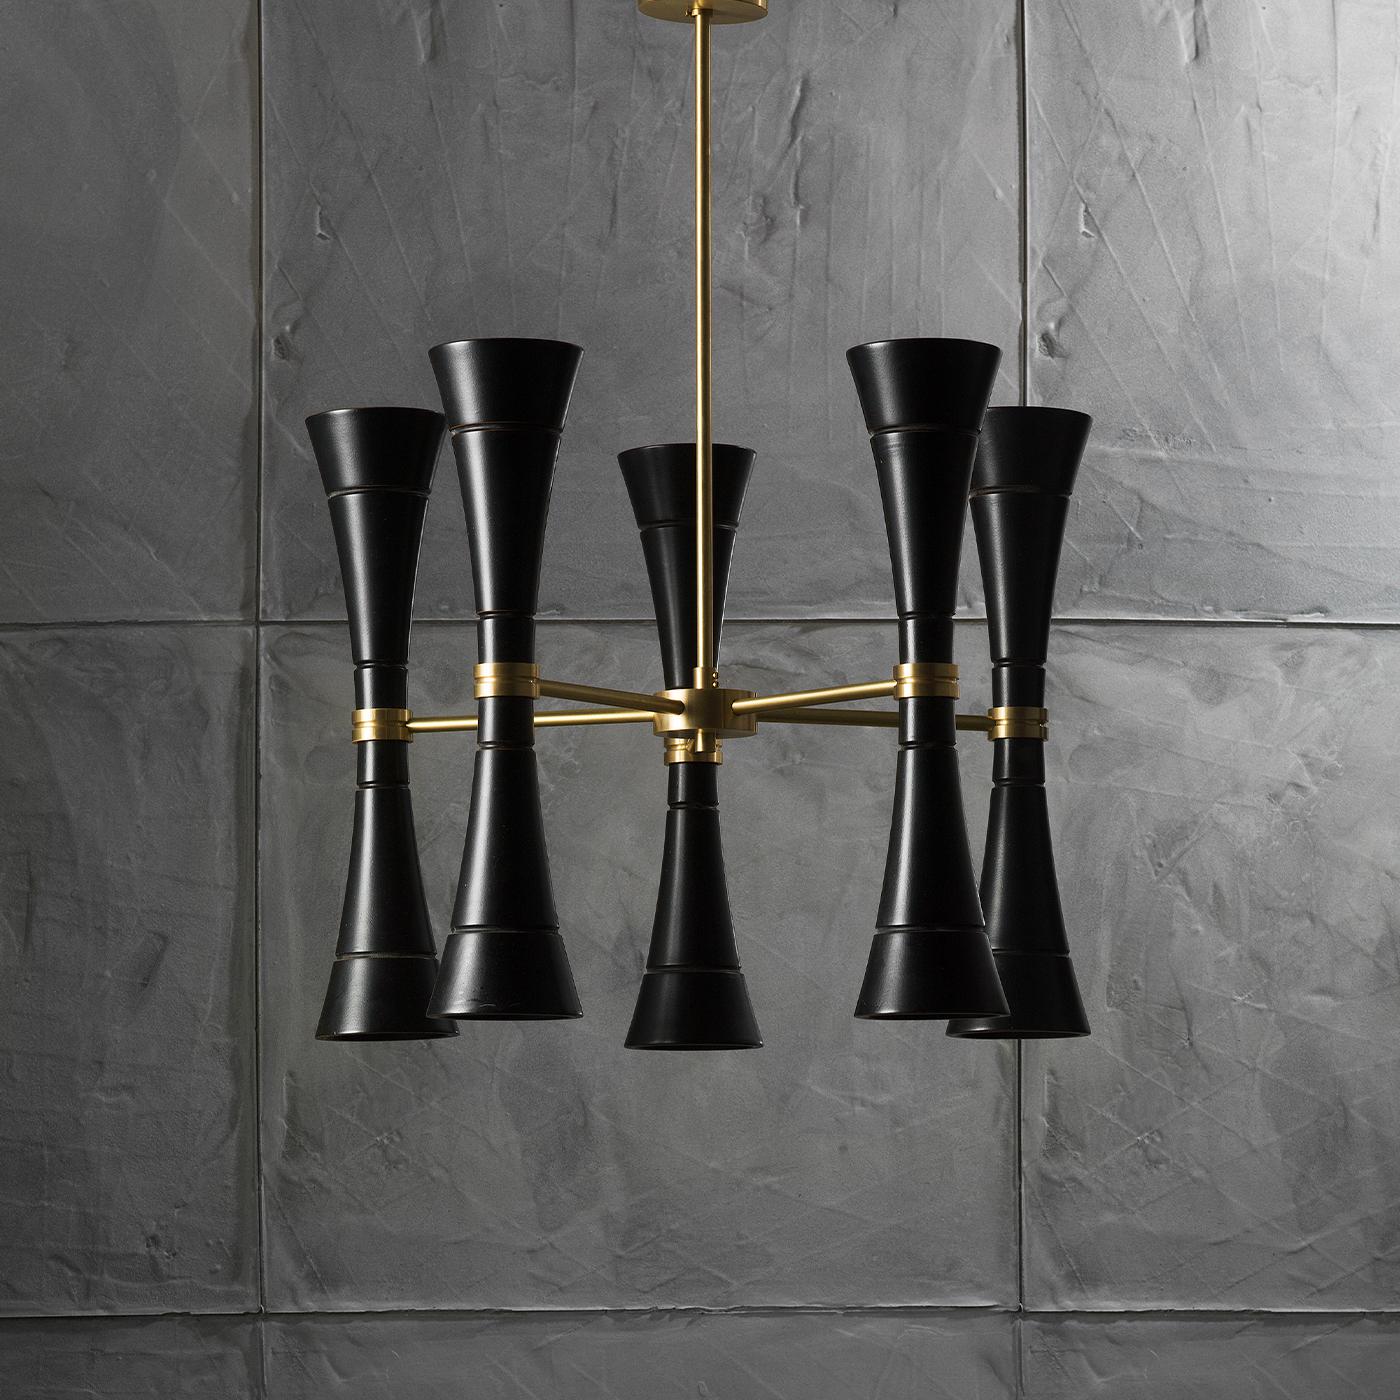 A chandelier with 10 antiqued-black painted wood lights and central structure in satin brass. A LED light is housed at the two ends of each cone-shaped element, so as to project the light both upwards and downwards. Perfect for a place that is in